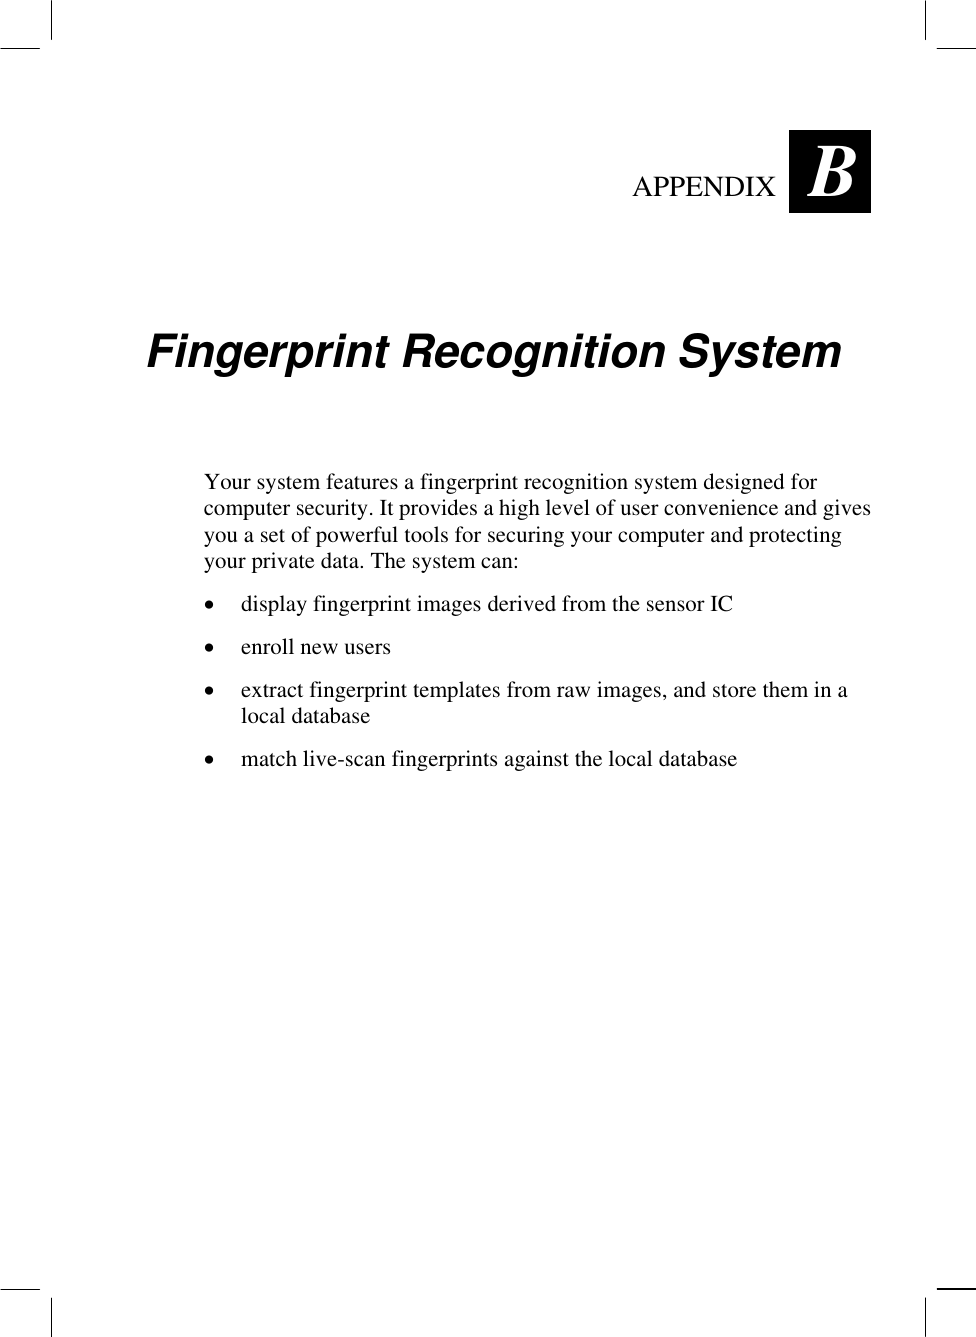   APPENDIX B Fingerprint Recognition System Your system features a fingerprint recognition system designed for computer security. It provides a high level of user convenience and gives you a set of powerful tools for securing your computer and protecting your private data. The system can: •  display fingerprint images derived from the sensor IC •  enroll new users •  extract fingerprint templates from raw images, and store them in a local database •  match live-scan fingerprints against the local database 